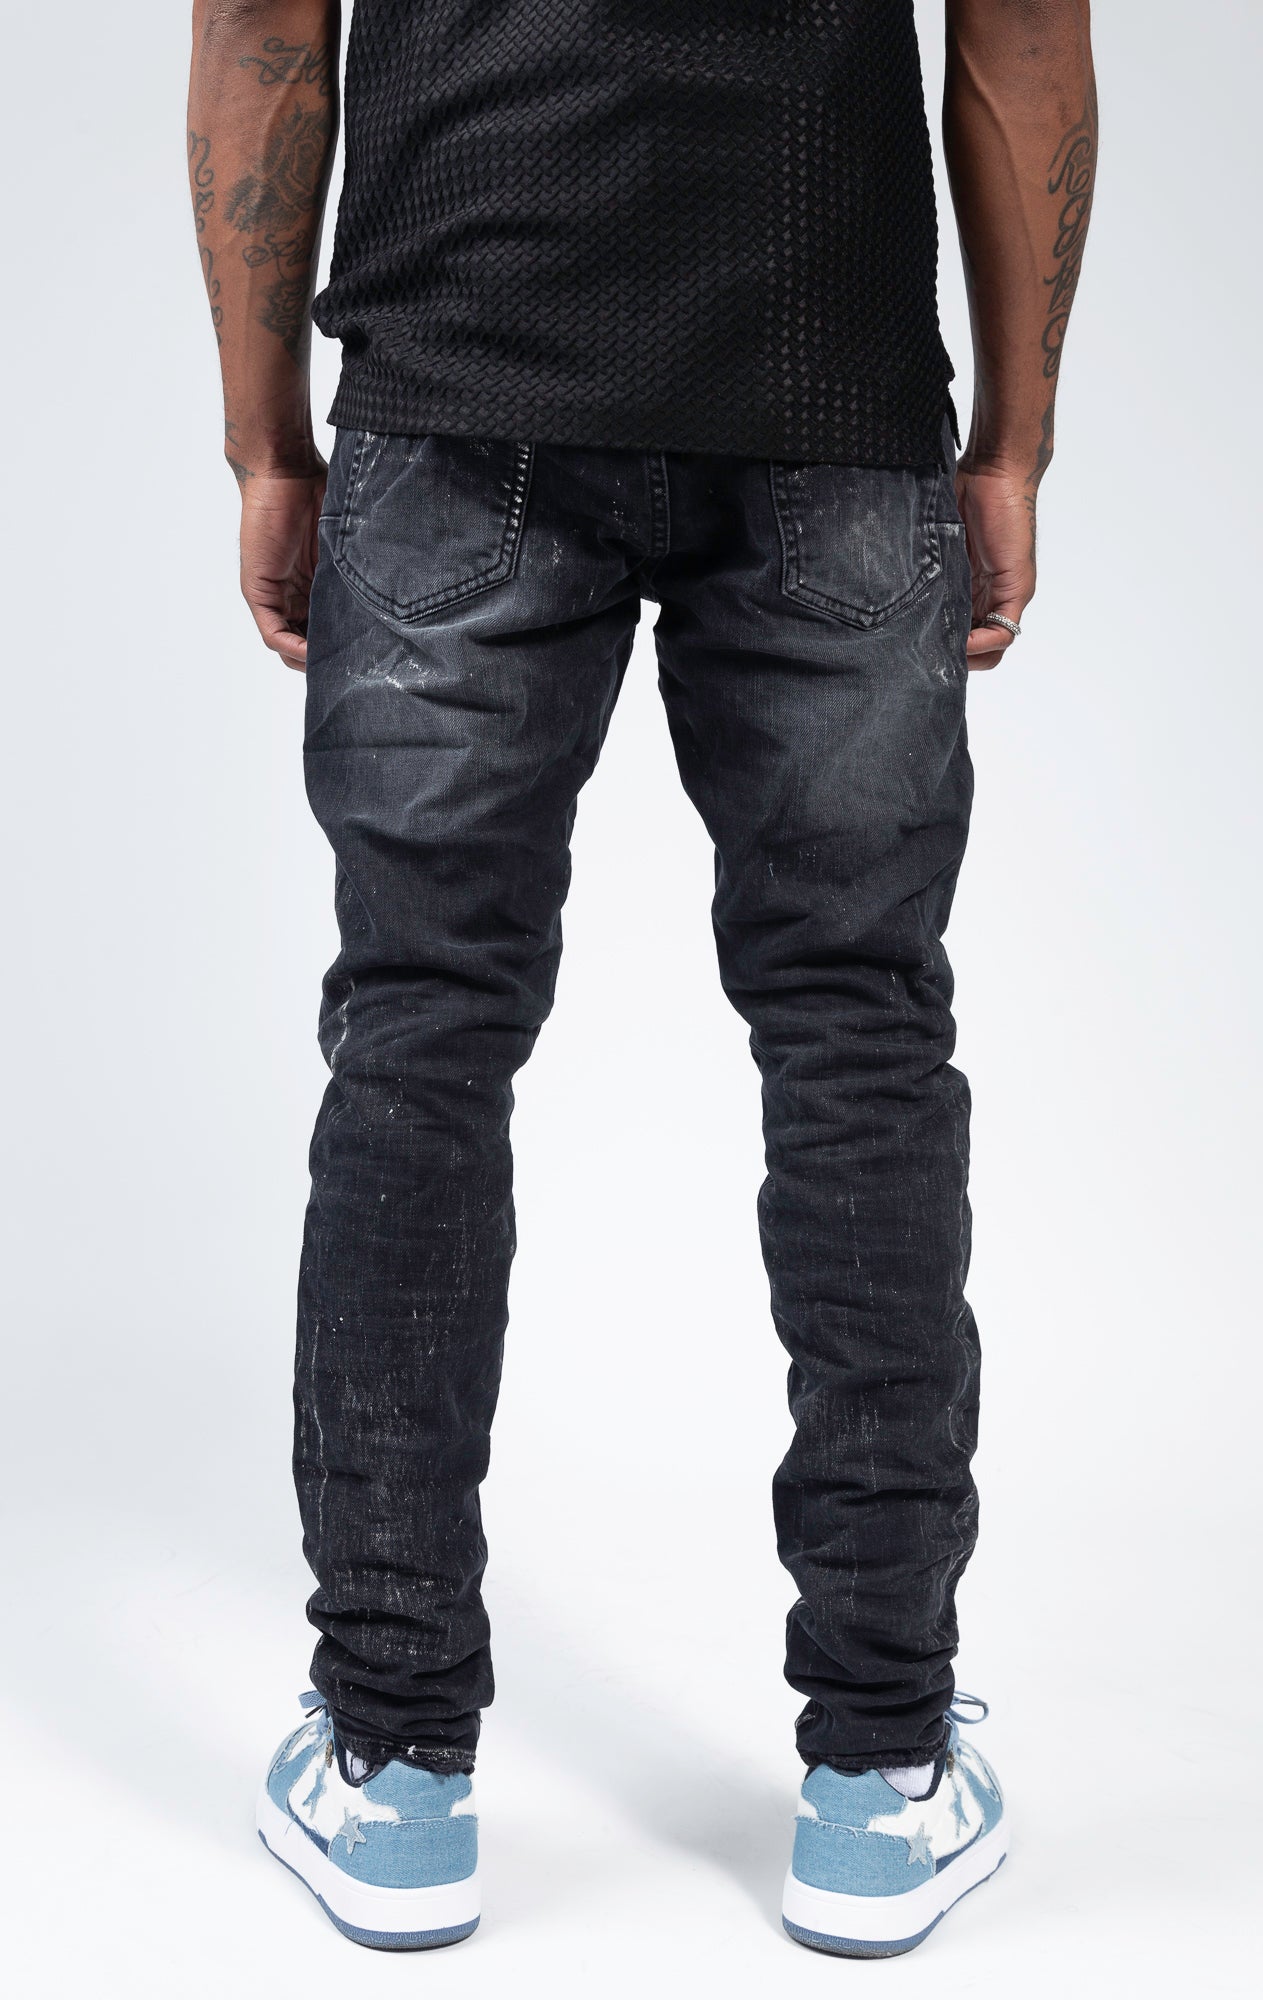 These jeans feature mid-rise comfort, slim-fit and a faded finish.